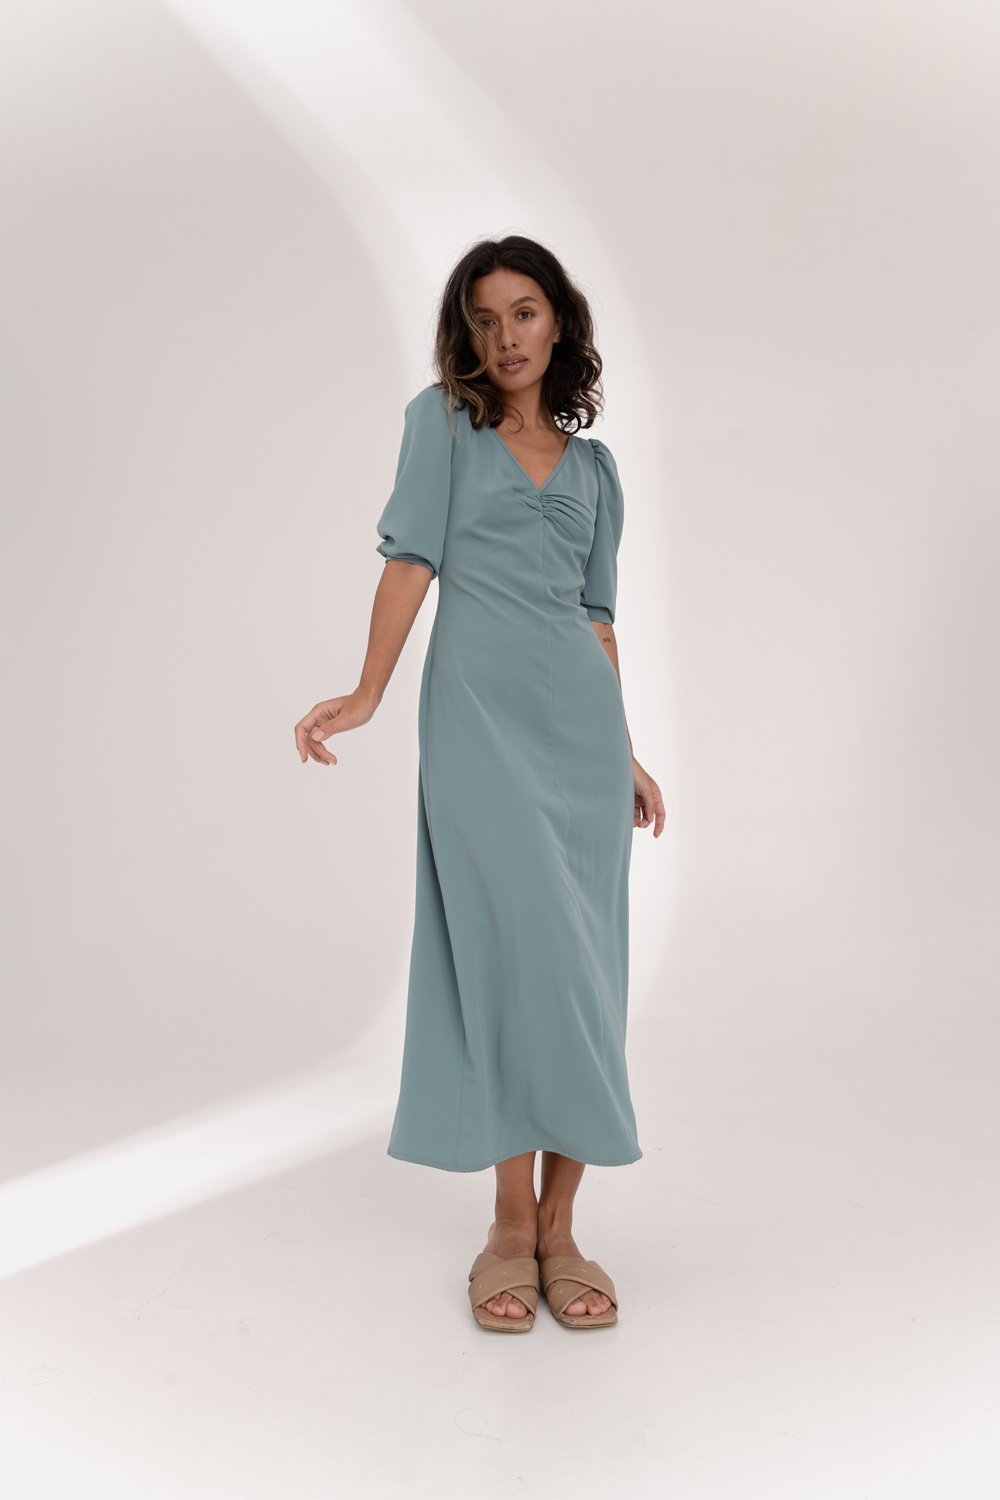 Green flowy dress with ruching at the chest